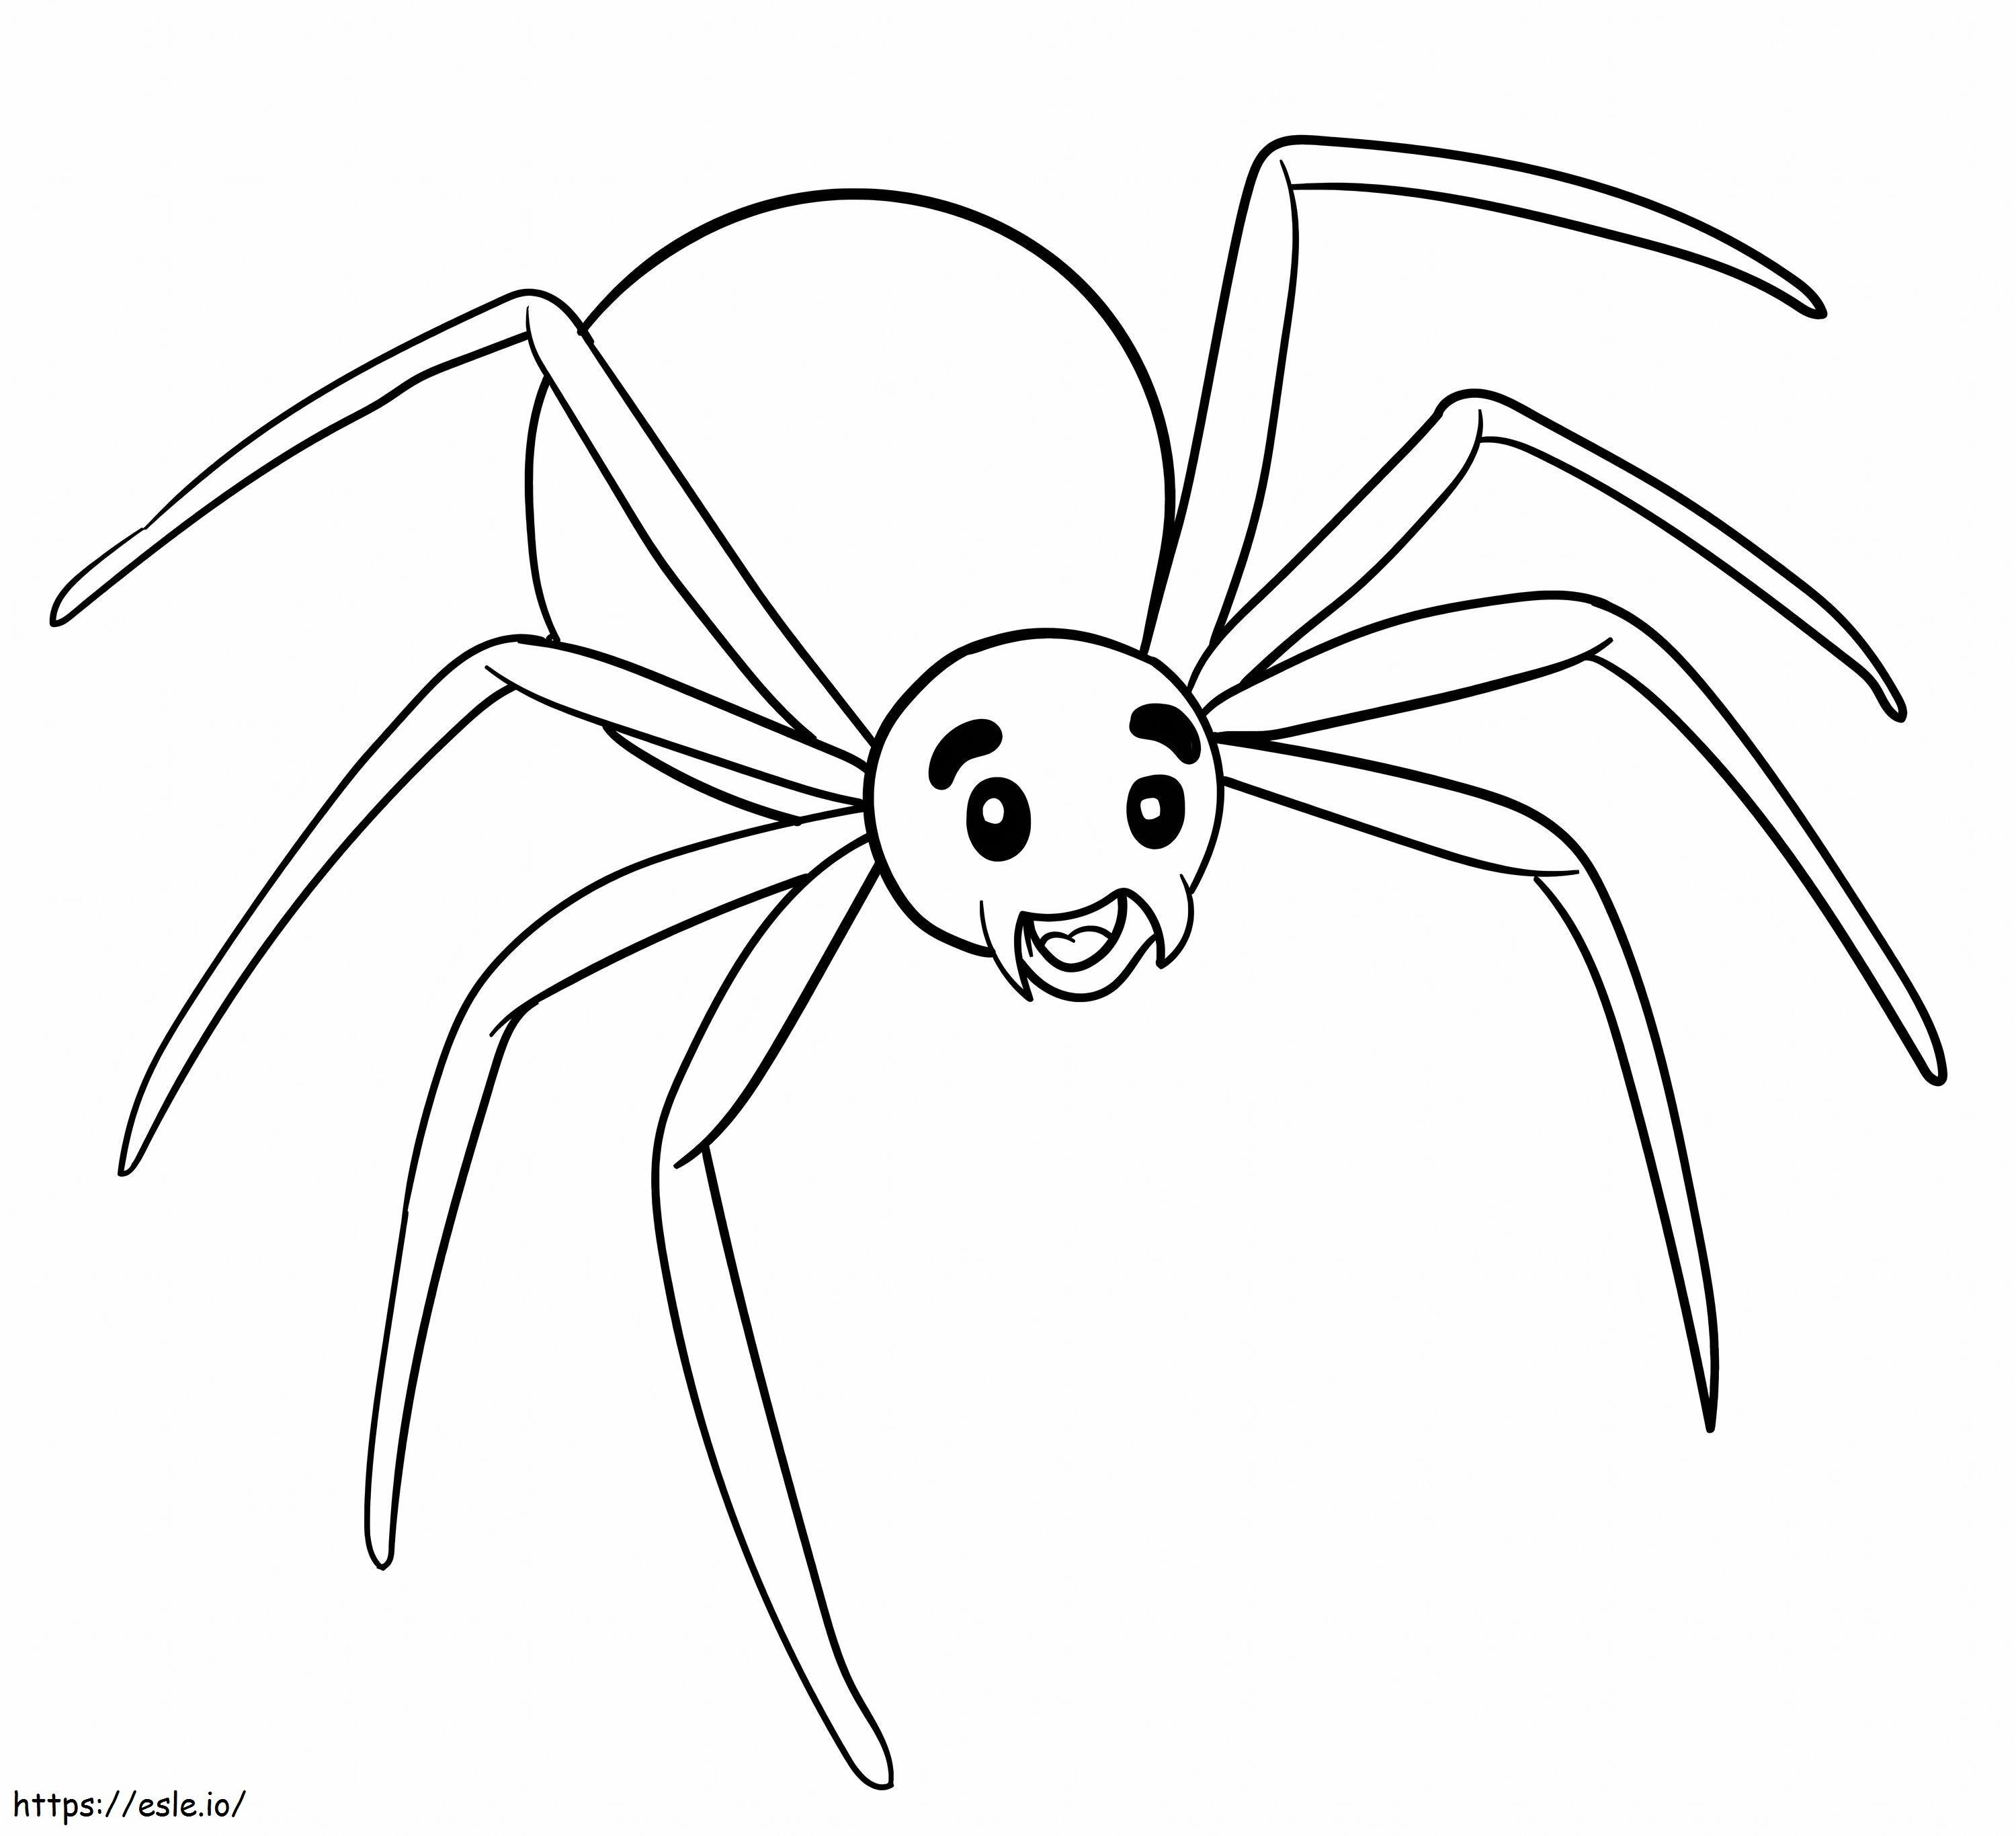 Spider Fun coloring page